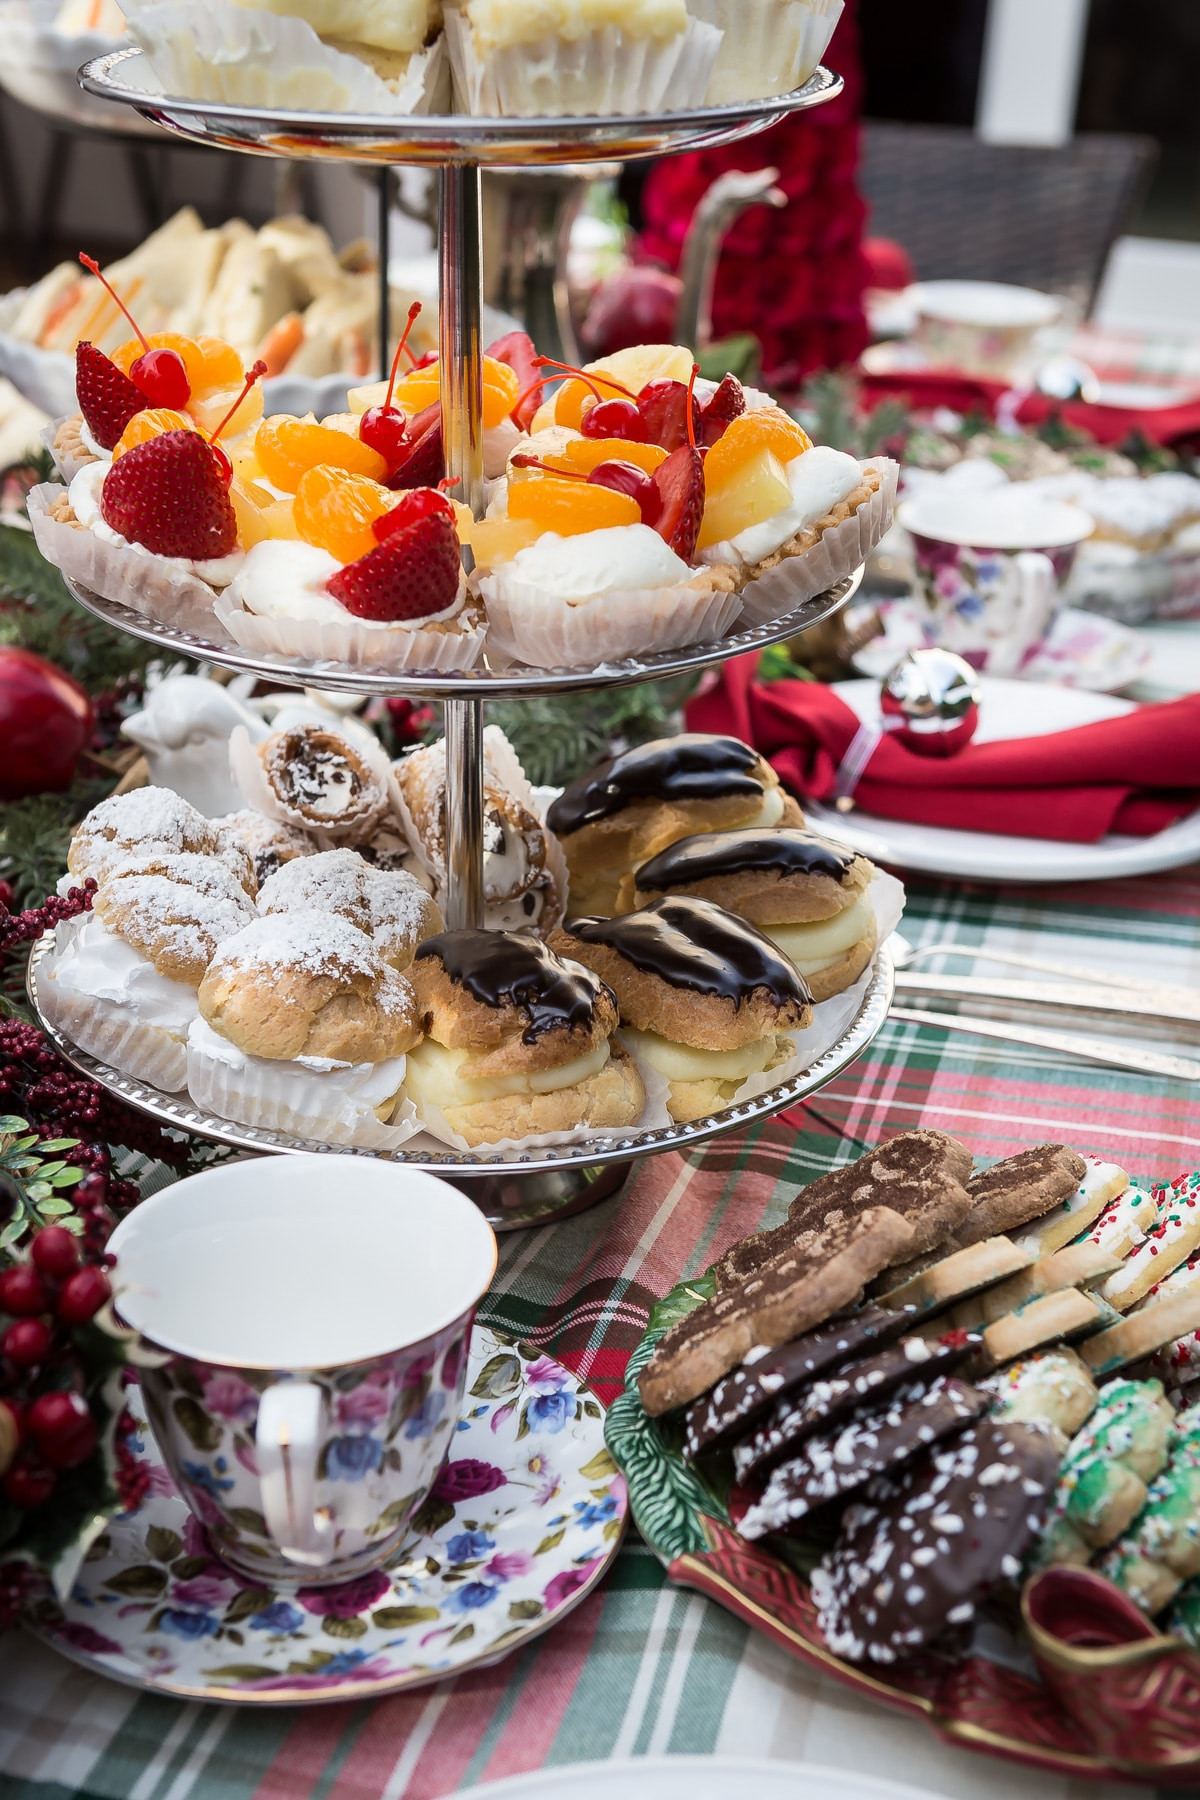 Christmas Tea Party Ideas
 How To Host a Perfect Christmas Tea Party Foodness Gracious